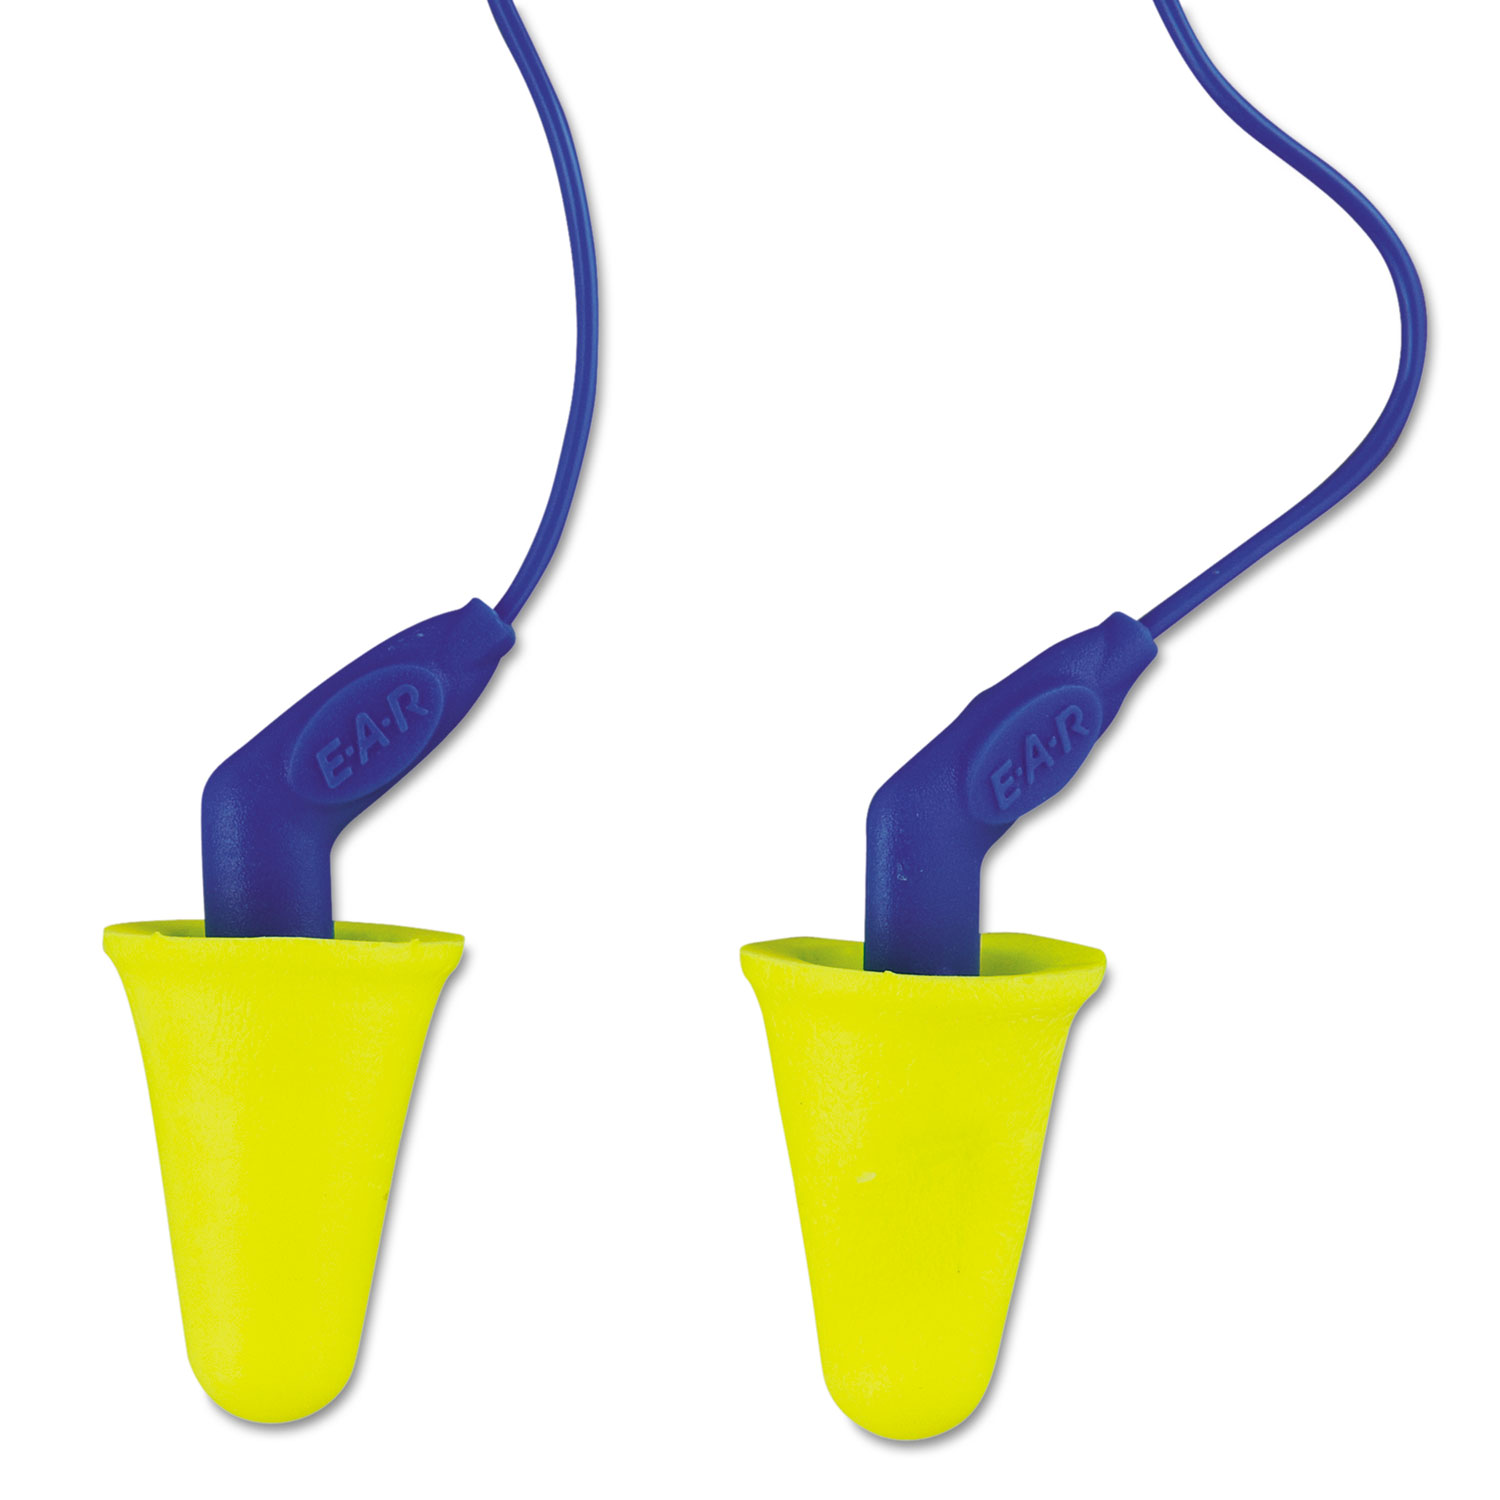 E-A-R Push-Ins SofTouch Earplugs, Corded, NRR 31